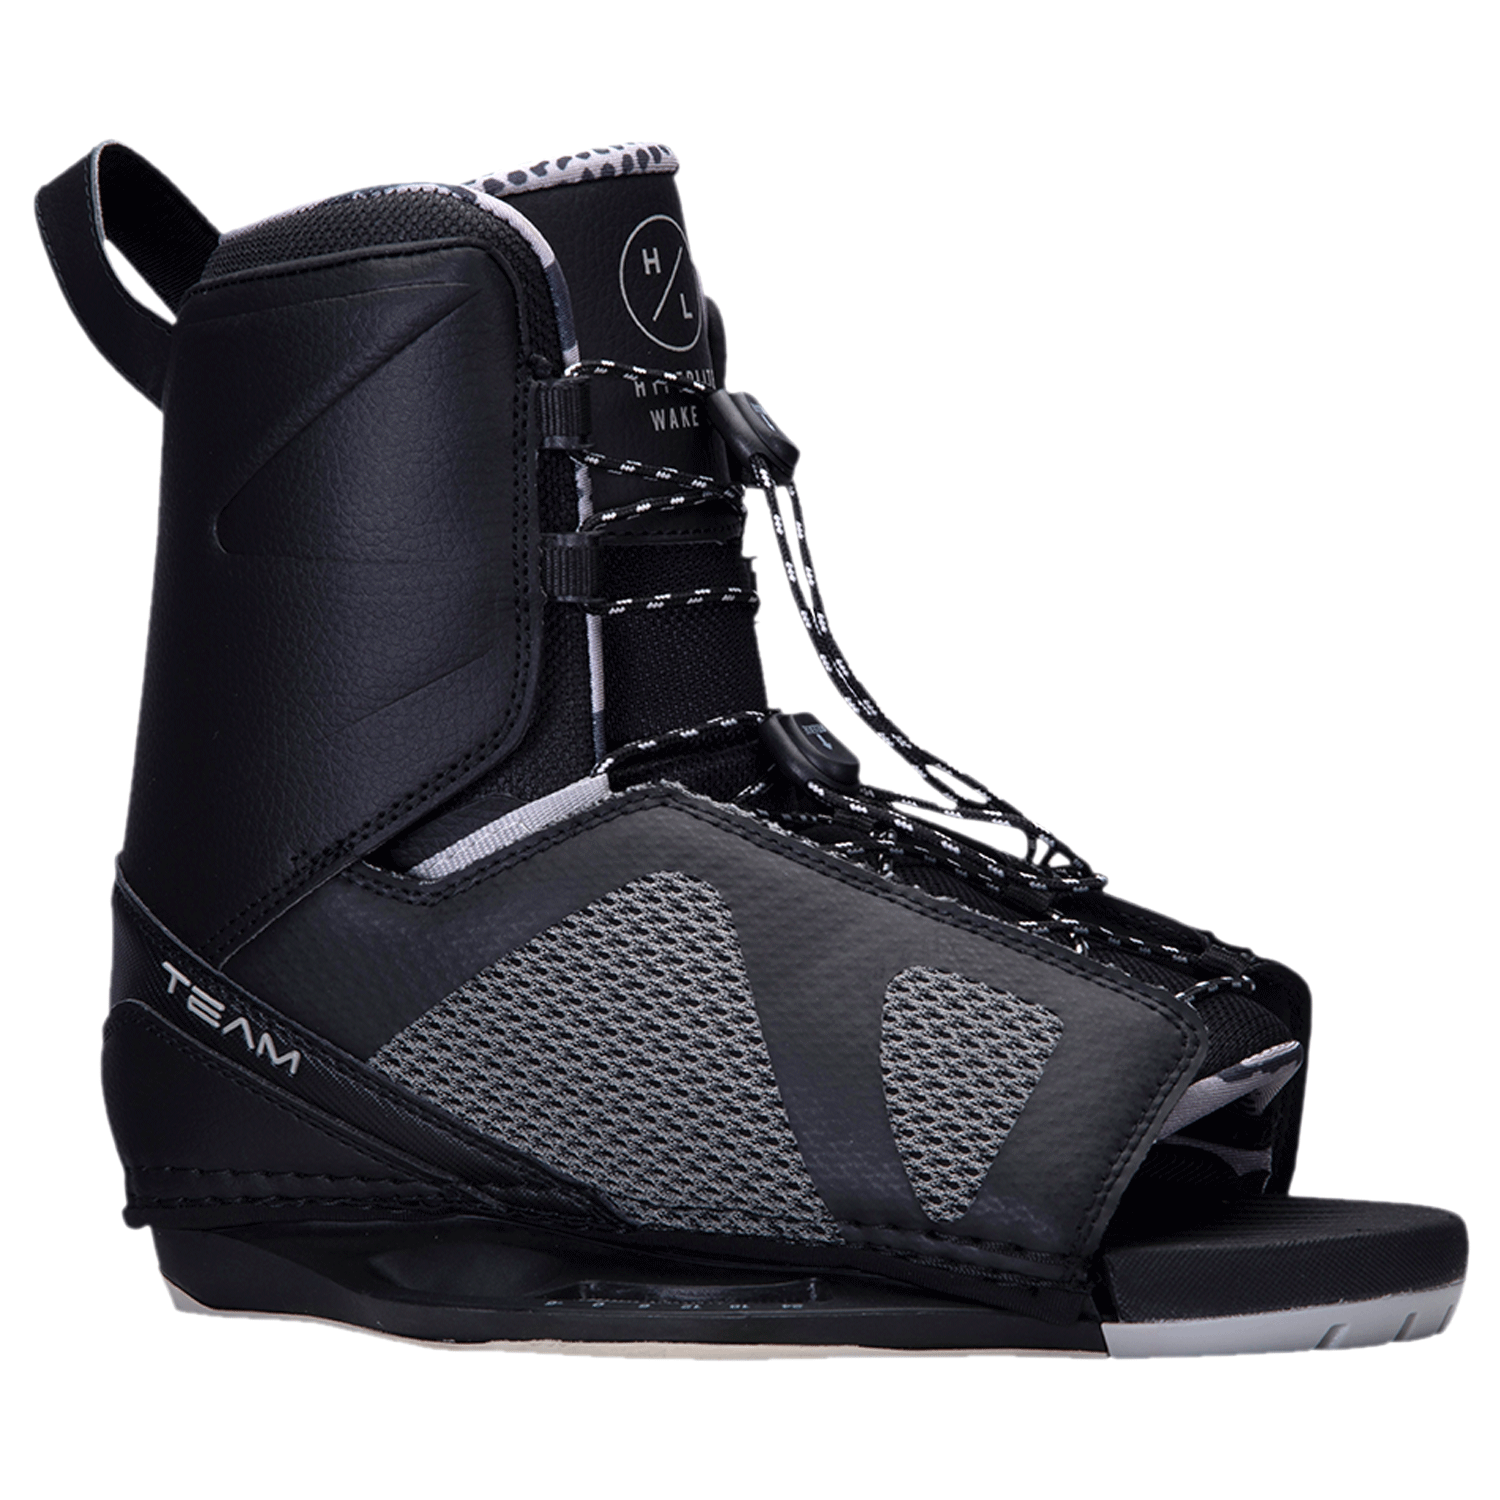 A pair of supportive and comfortable Hyperlite 2024 Team OT Bindings ski boots with adjustability, showcased on a white background.